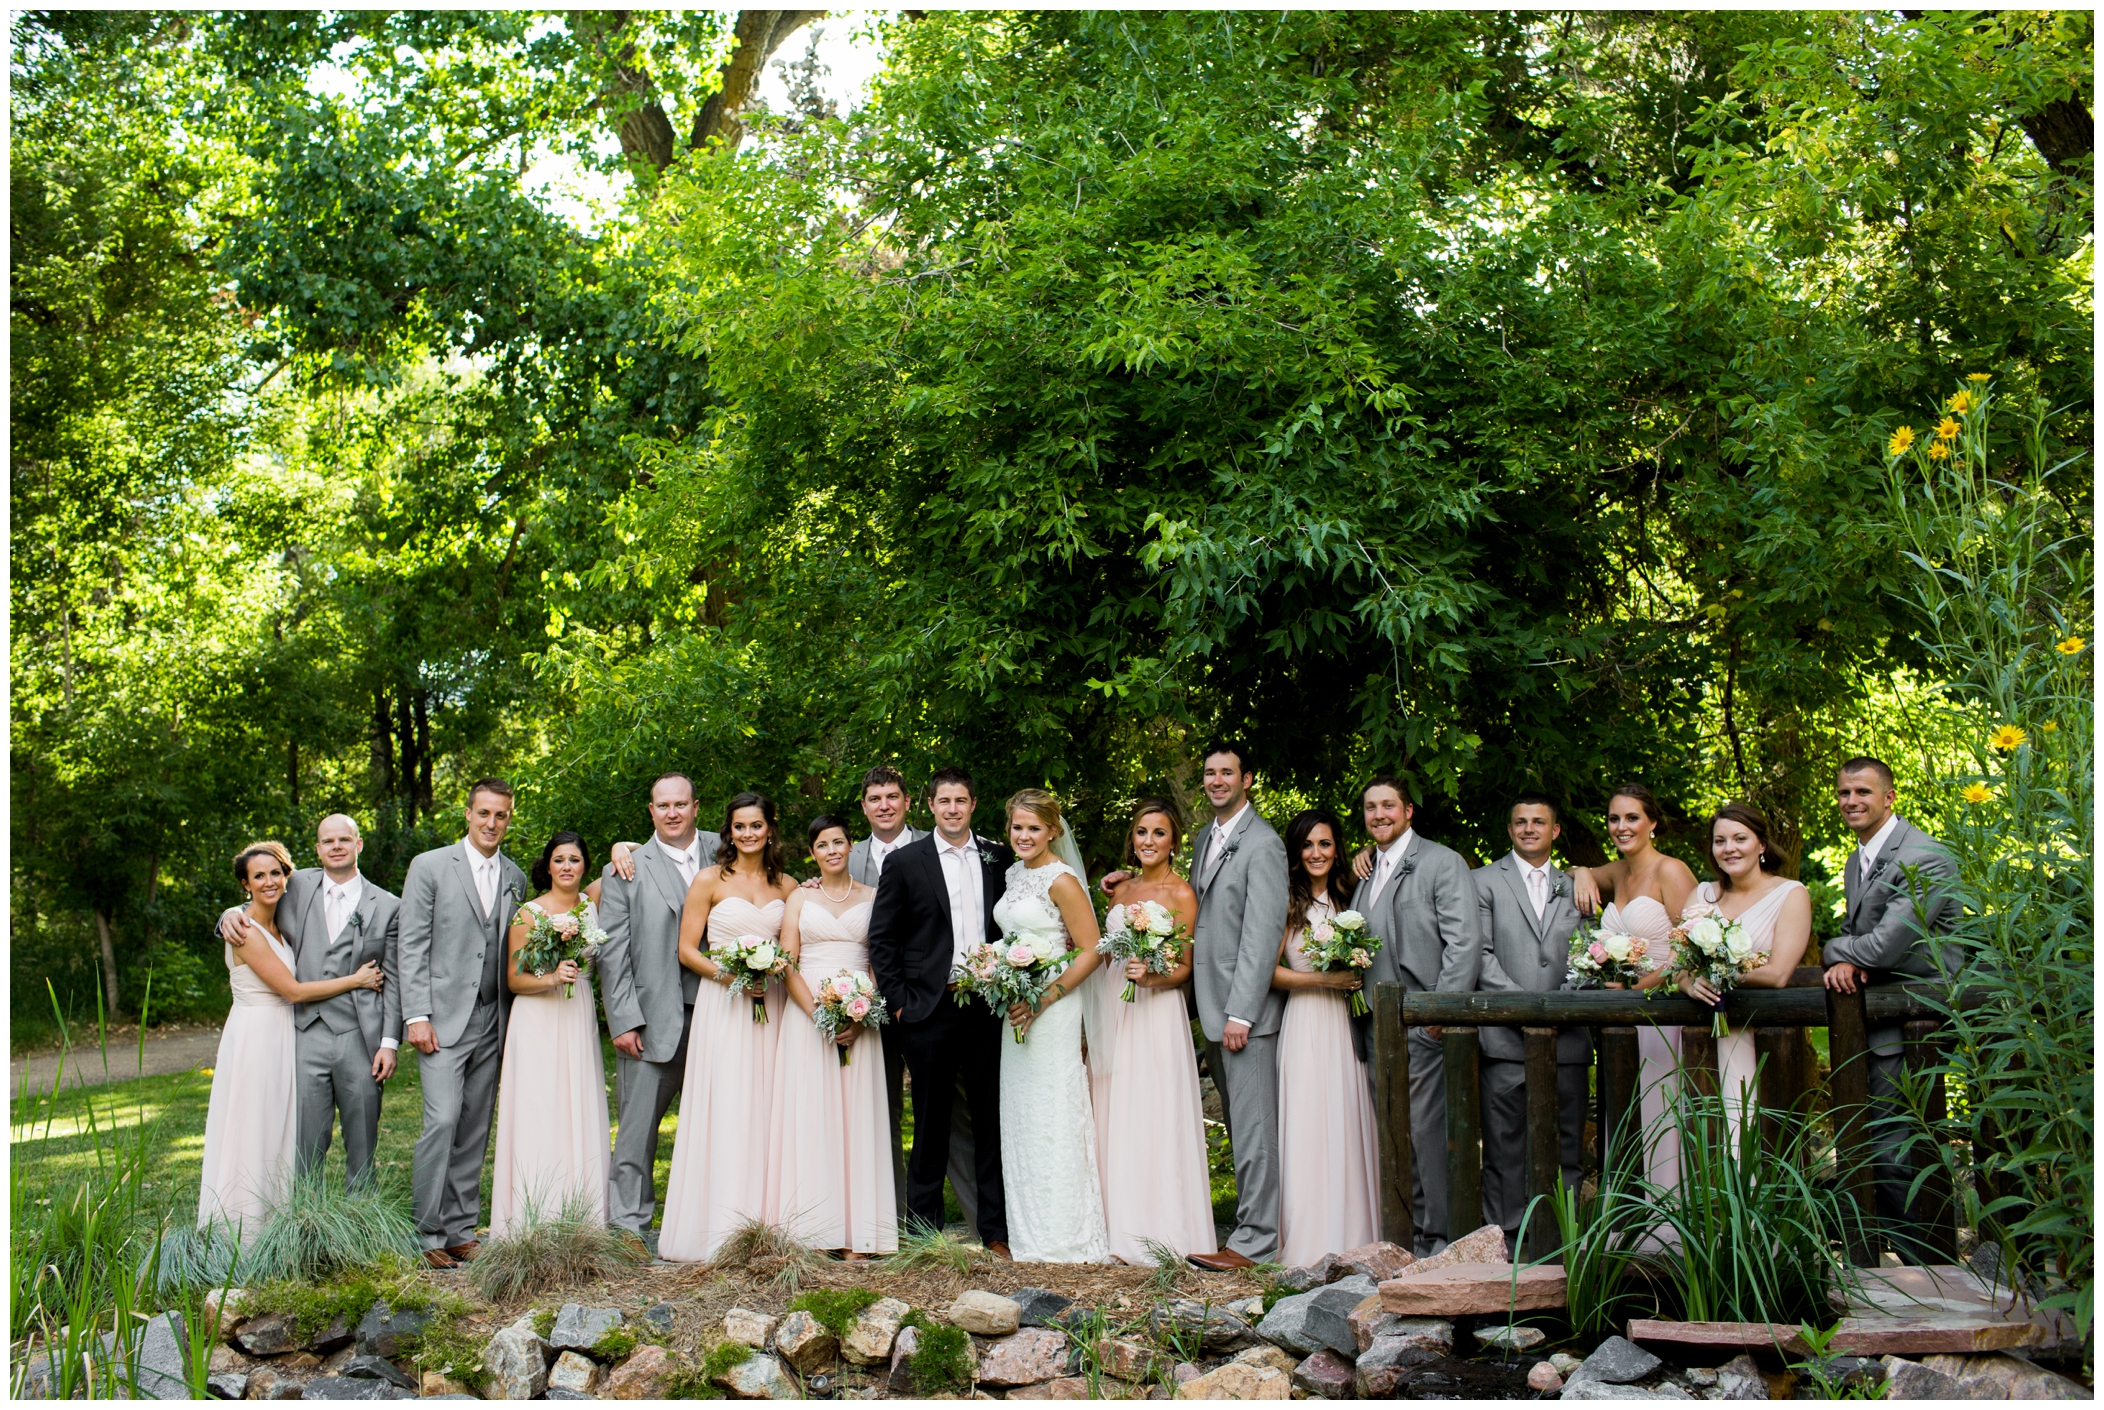 gray and pink wedding party attire 